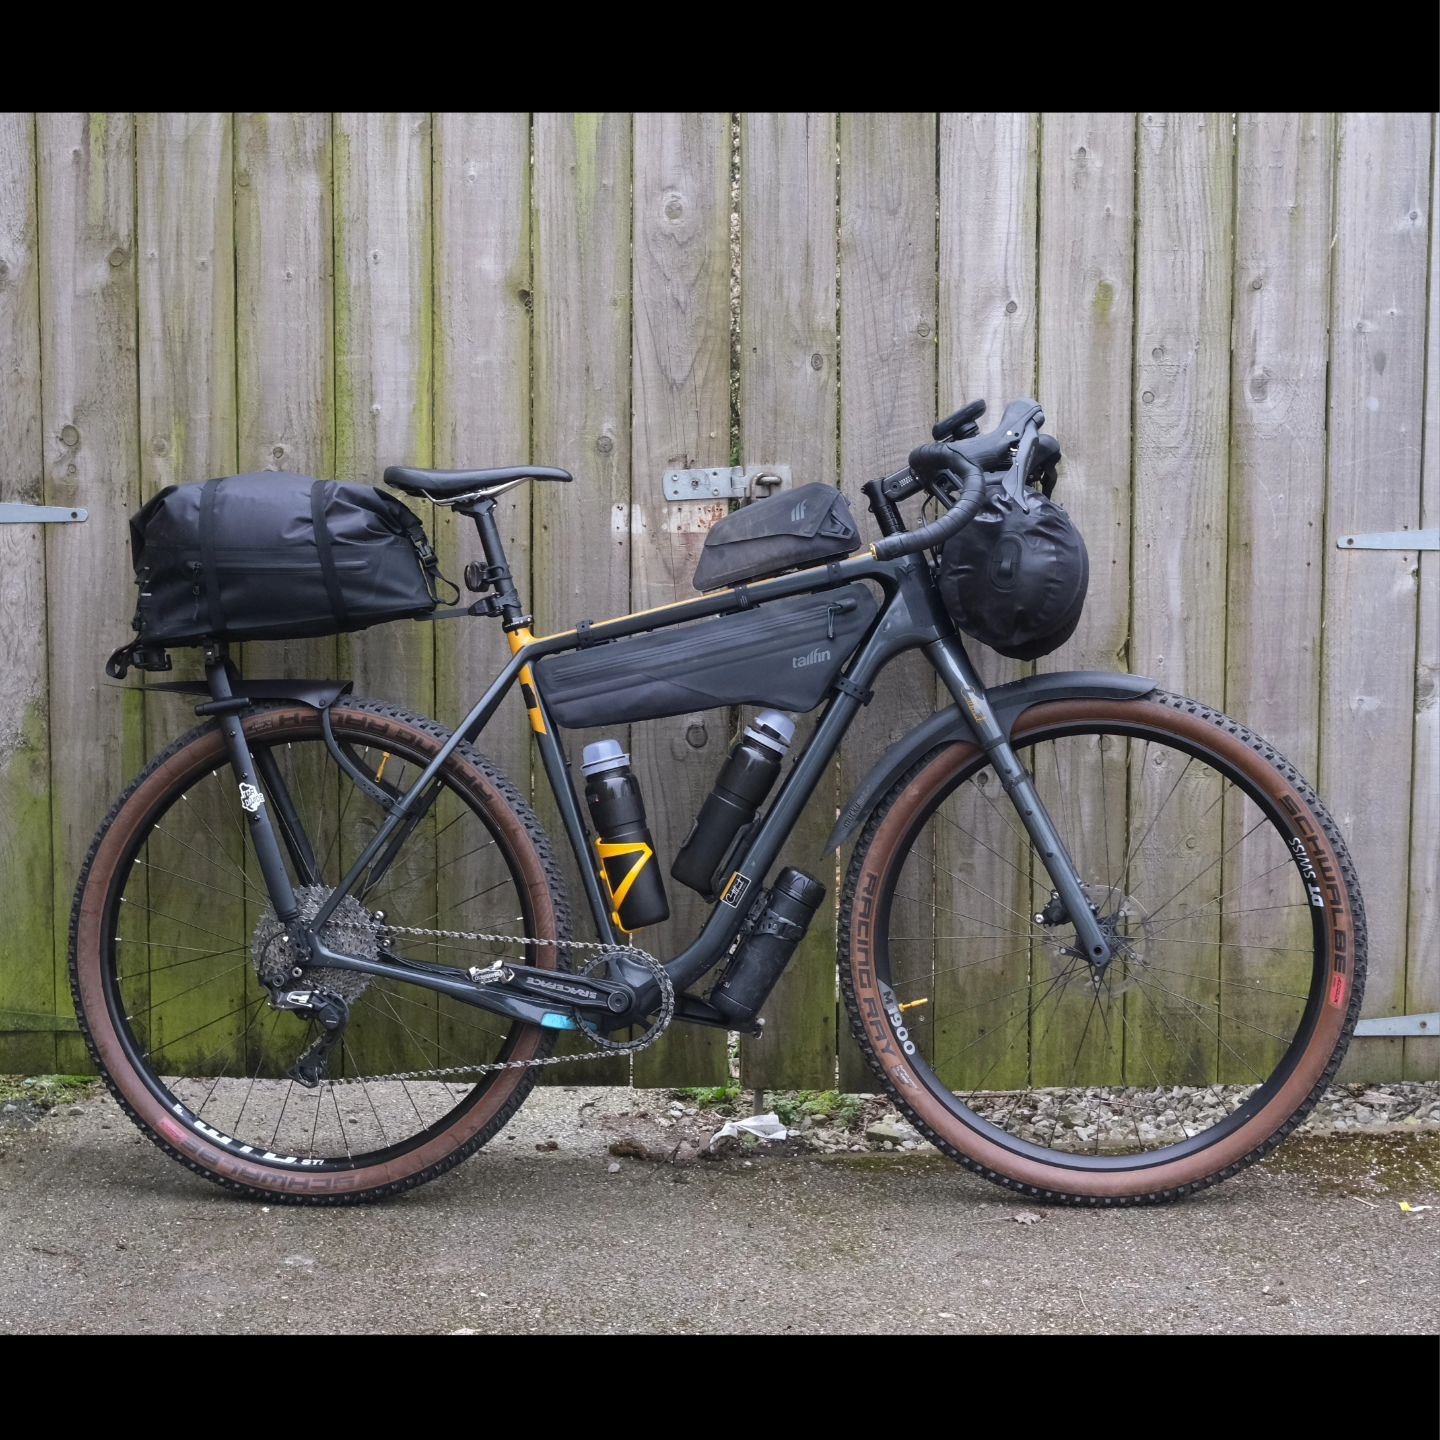 RIGS OF....the Tor Divide 🚲

Have you started thinking about your set-up for the event? Send us a photo, a description of bike, bags and highlights and we will include them in an article.

Here's an example:
BIKE: nearly stock Salsa Cutthroat with a